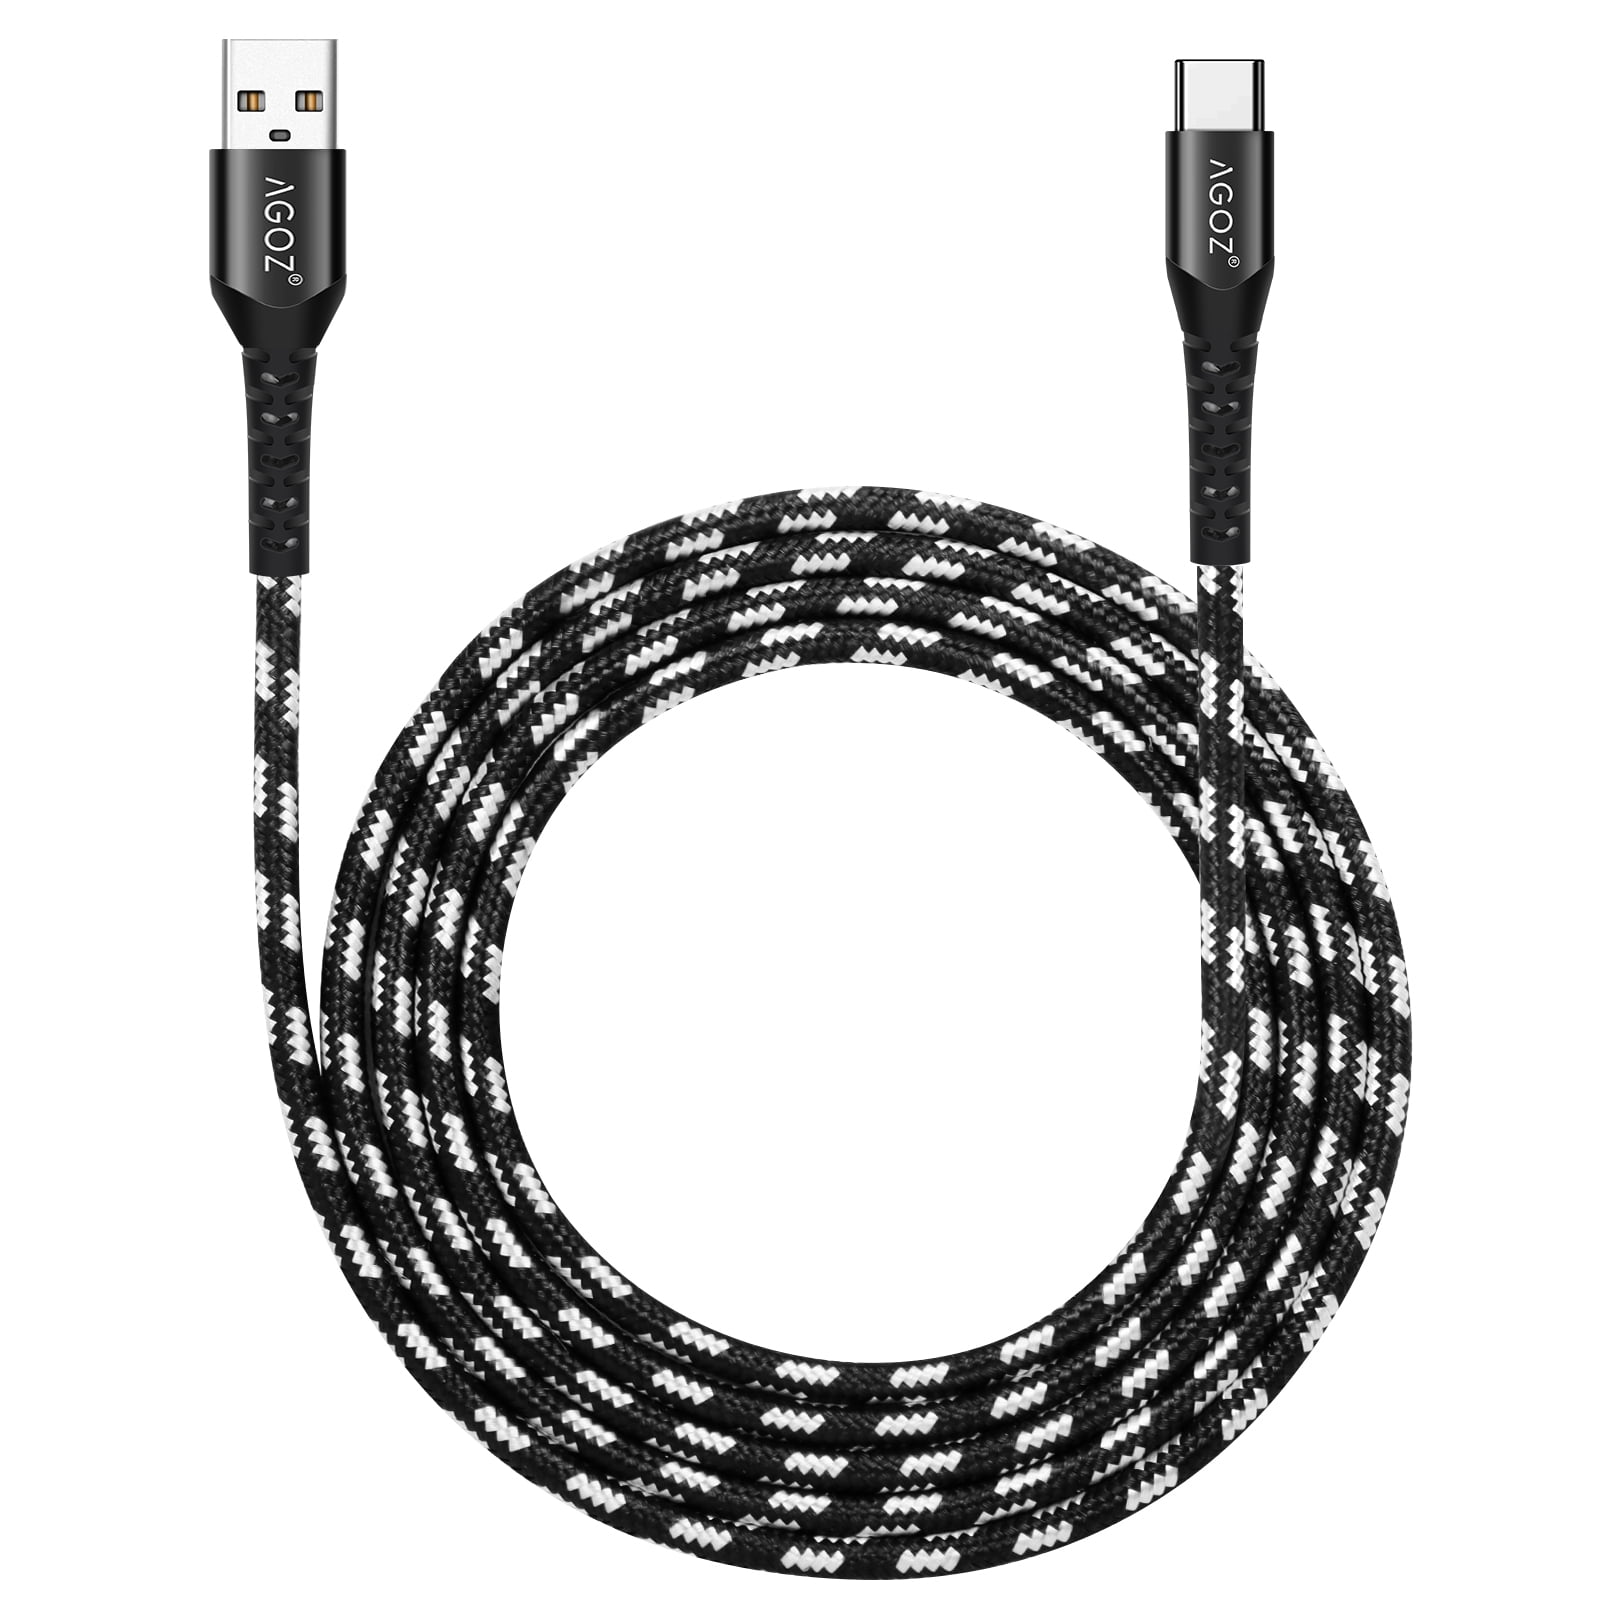 USB C Cable, Baseus 100W PD 5A QC 4.0 Fast Charging USB C to USB C Cable,  Zinc Alloy Nylon Braided USB Type C Charger Cable for iPhone  15/Pro/Plus/Pro